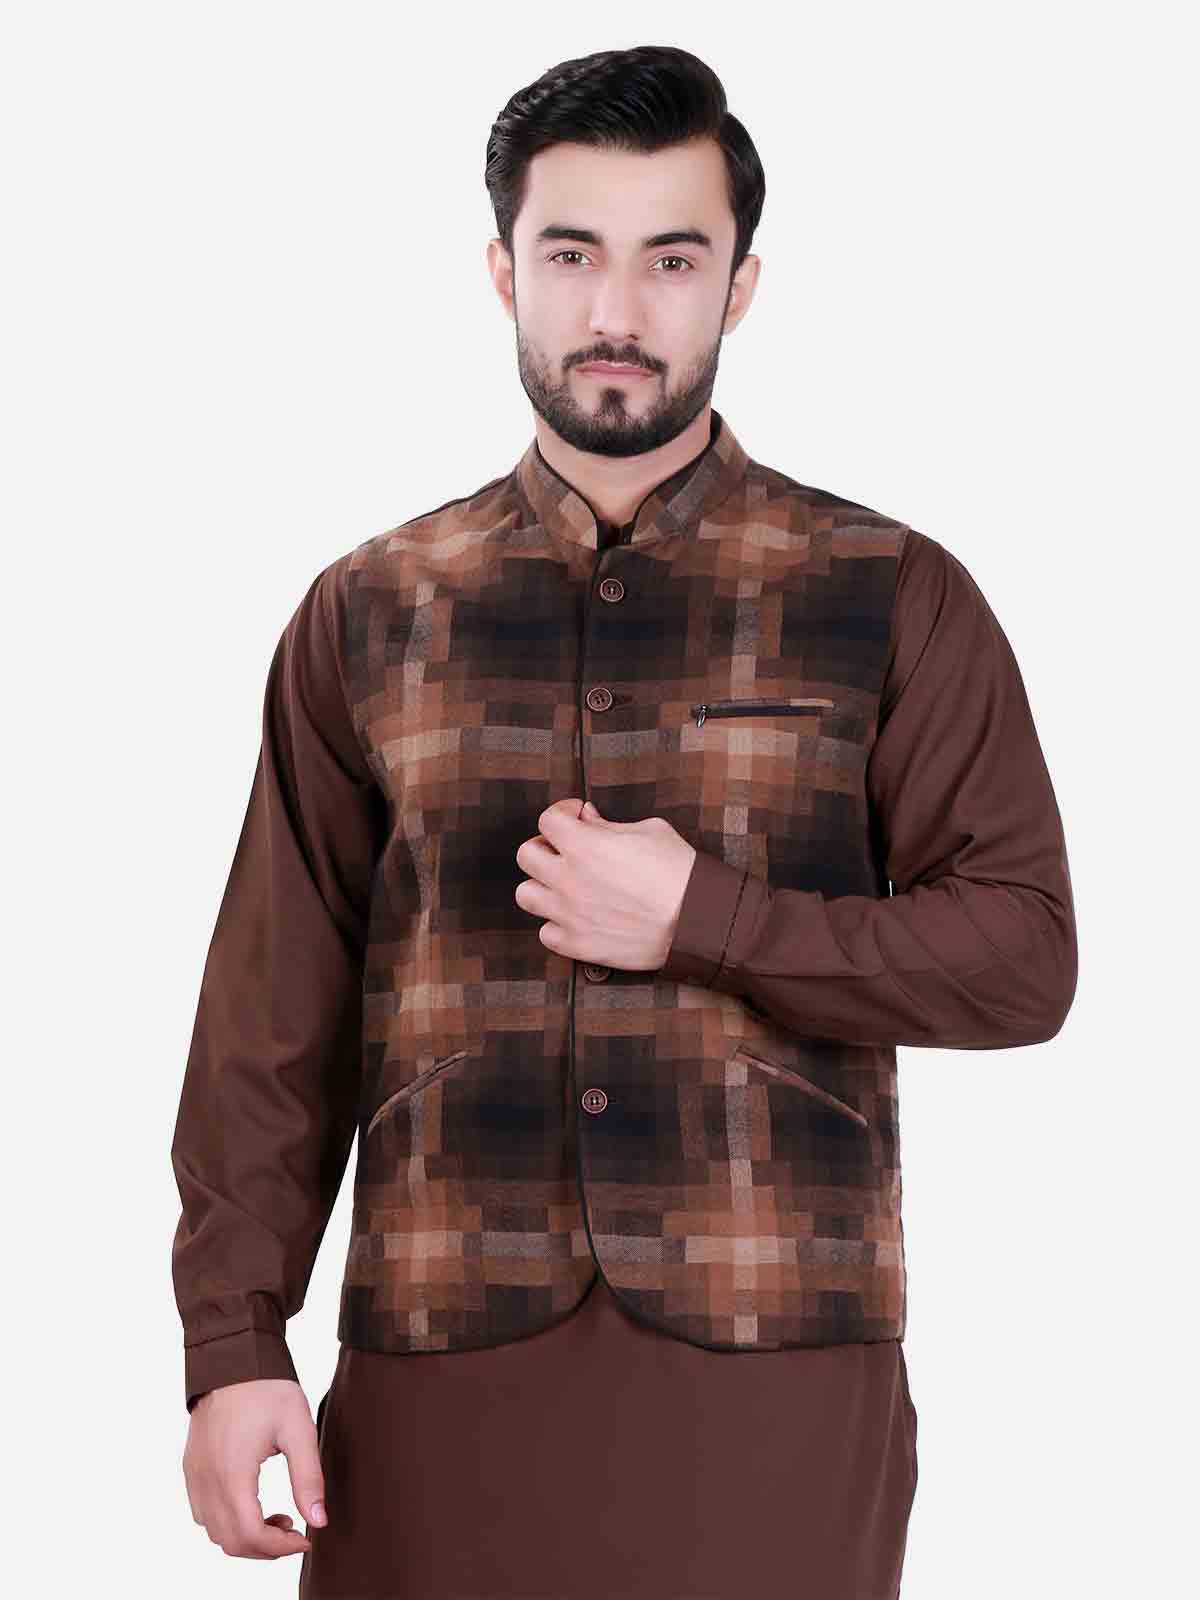 Brown and black waistcoat designs 2017 with brown kurta for boys in Pakistan